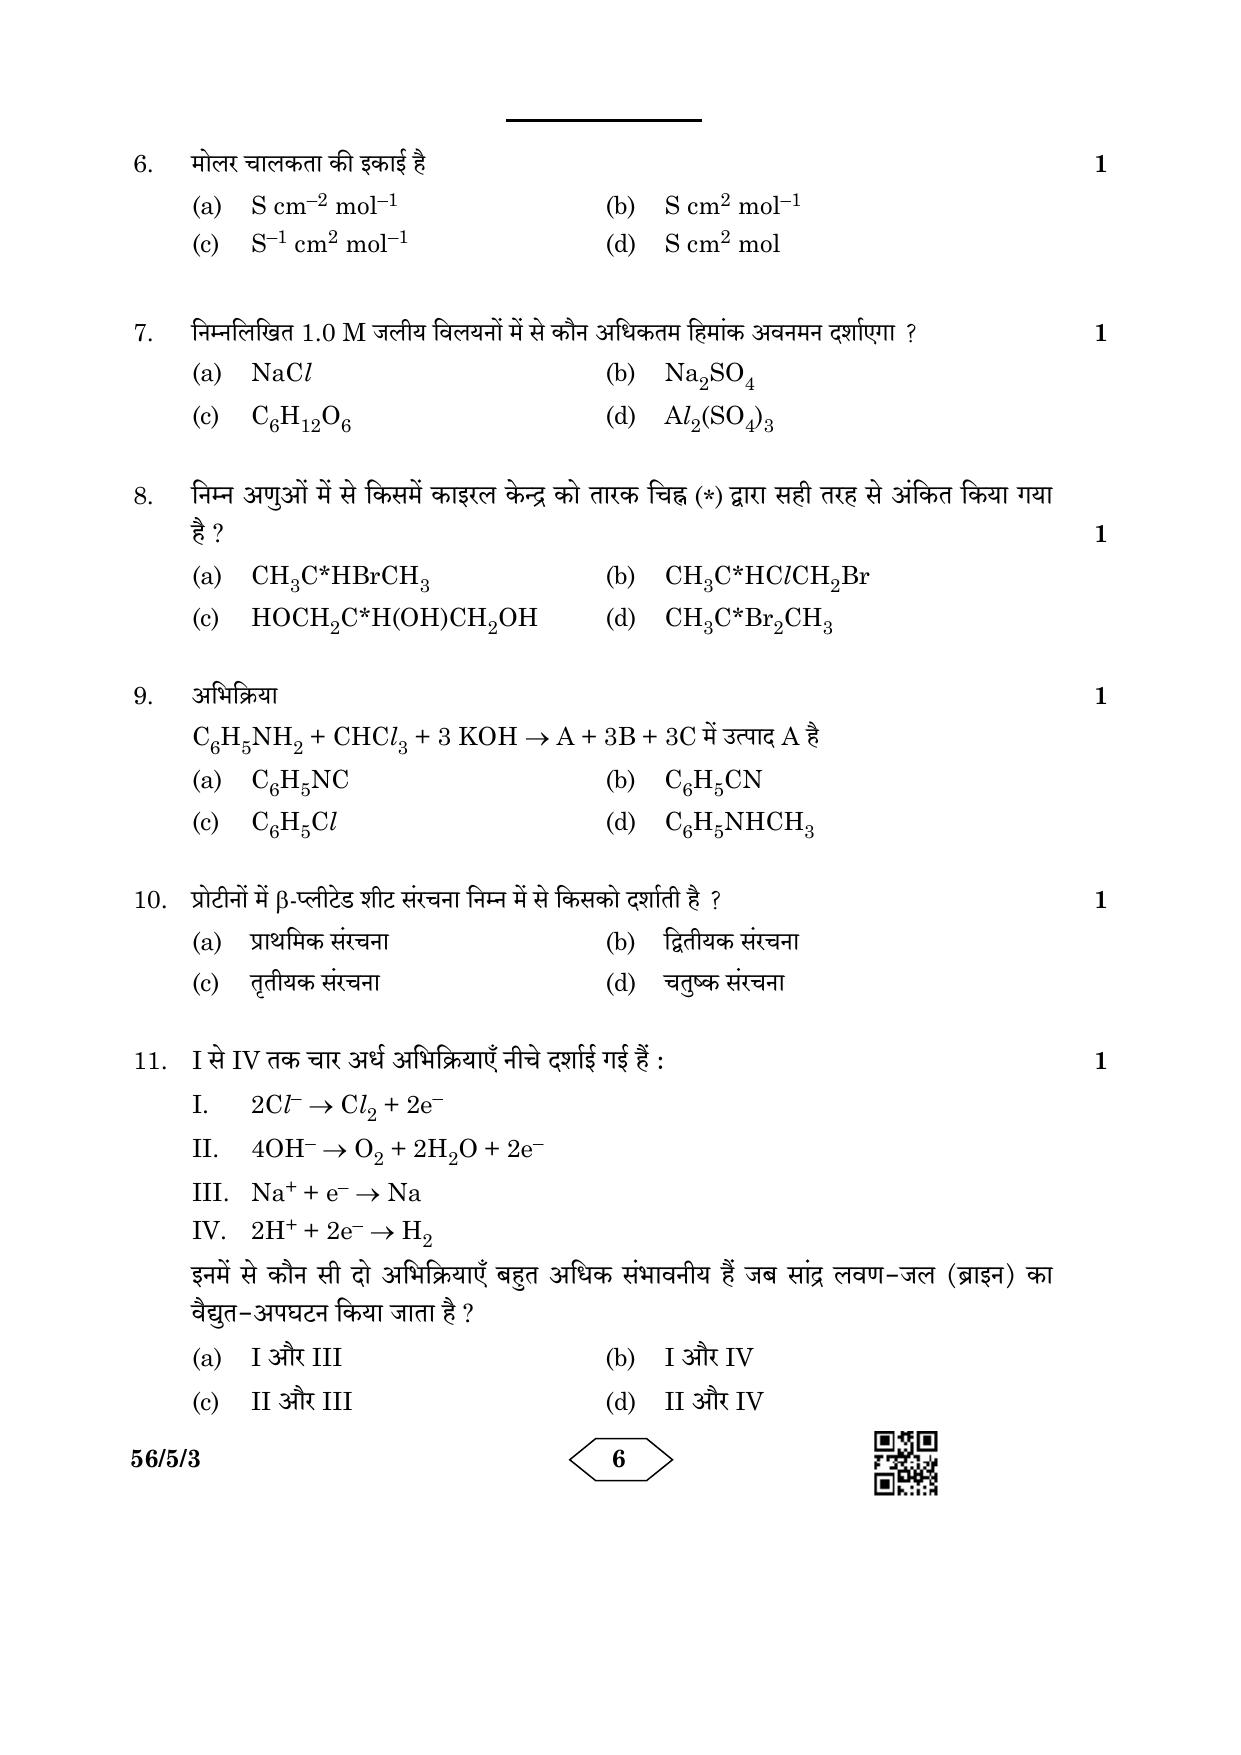 CBSE Class 12 56-5-3 Chemistry 2023 Question Paper - Page 6